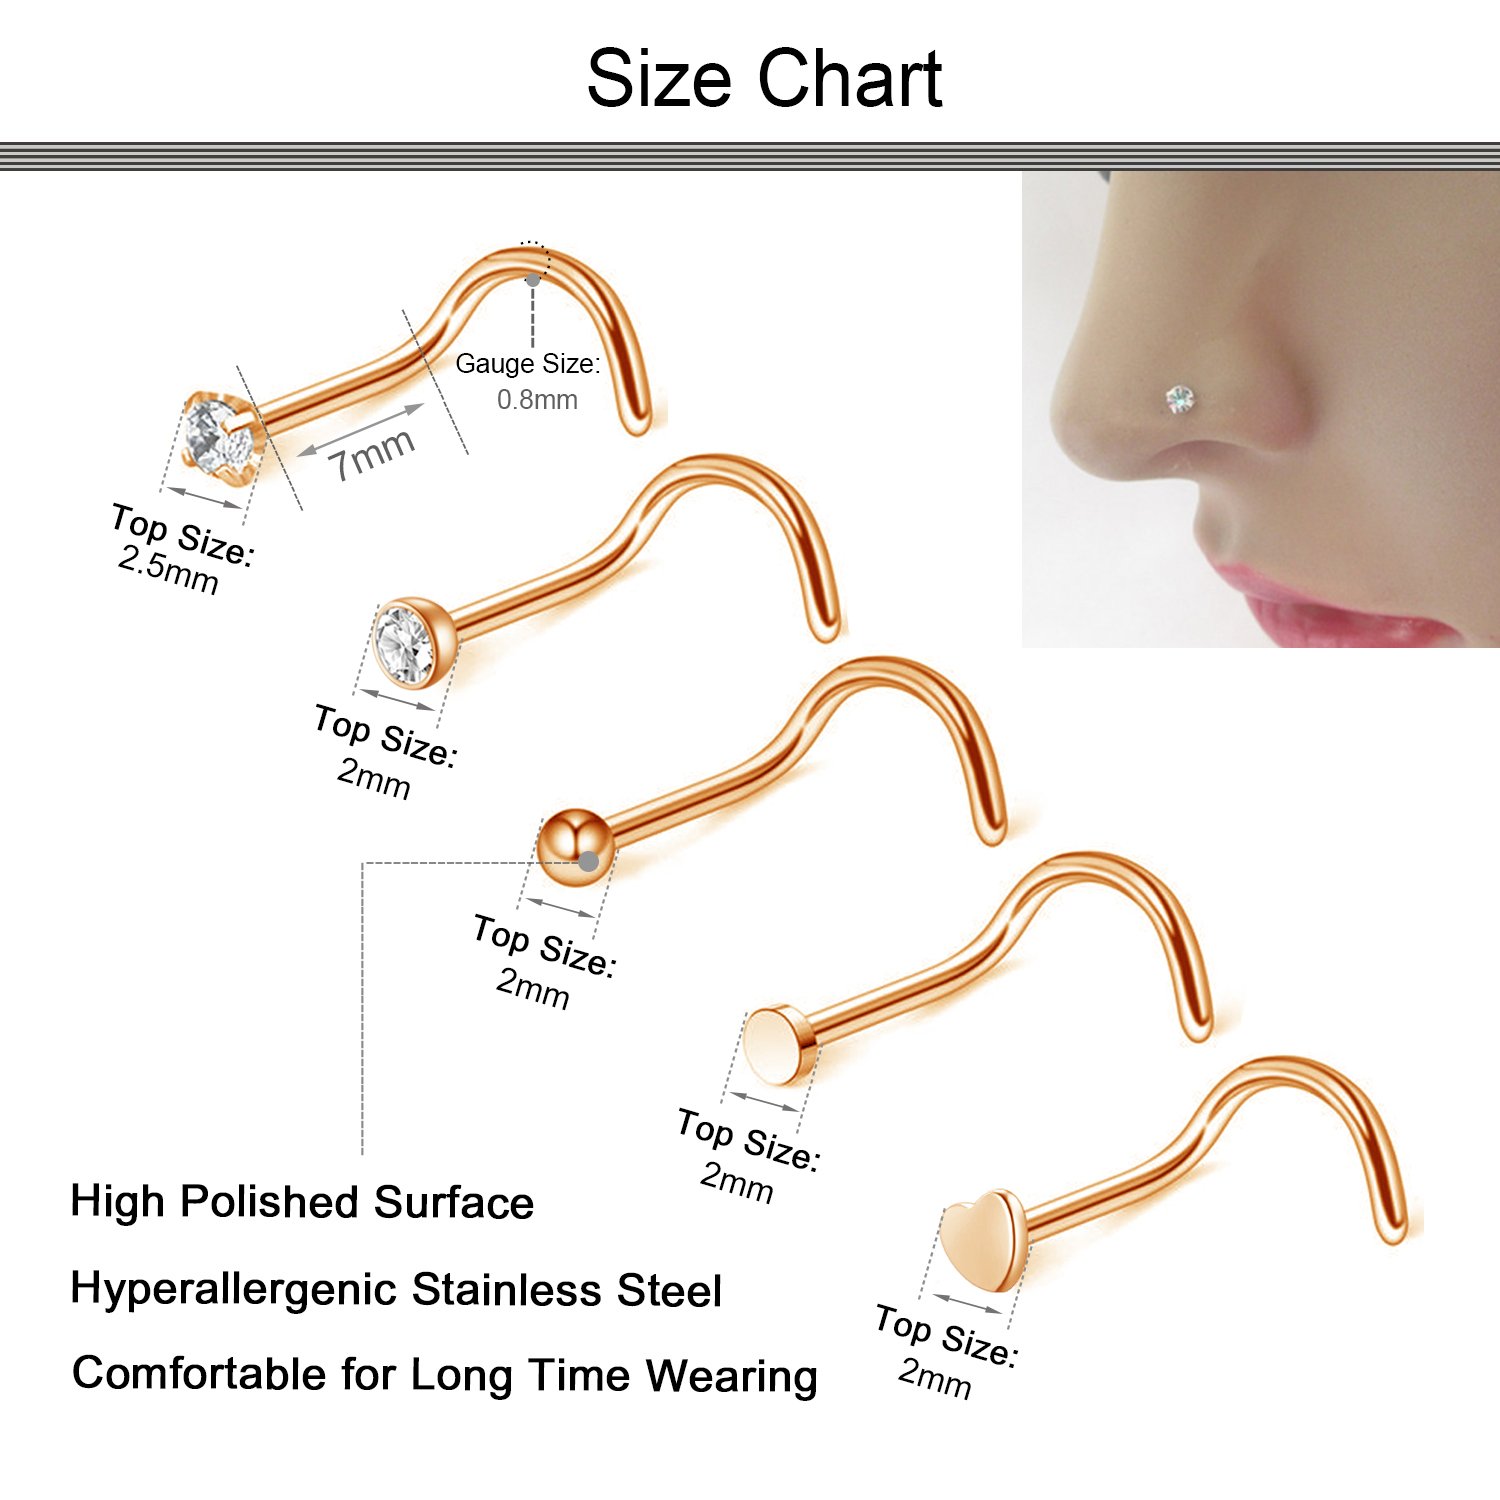 D.Bella 20G Nose Rings for Women Nose Piercings Jewelry Hypoallergenic Nose Rings Hoops L Shaped Nose Studs 8mm 10mm 12mm Hoop Nose Piercing Jewelry